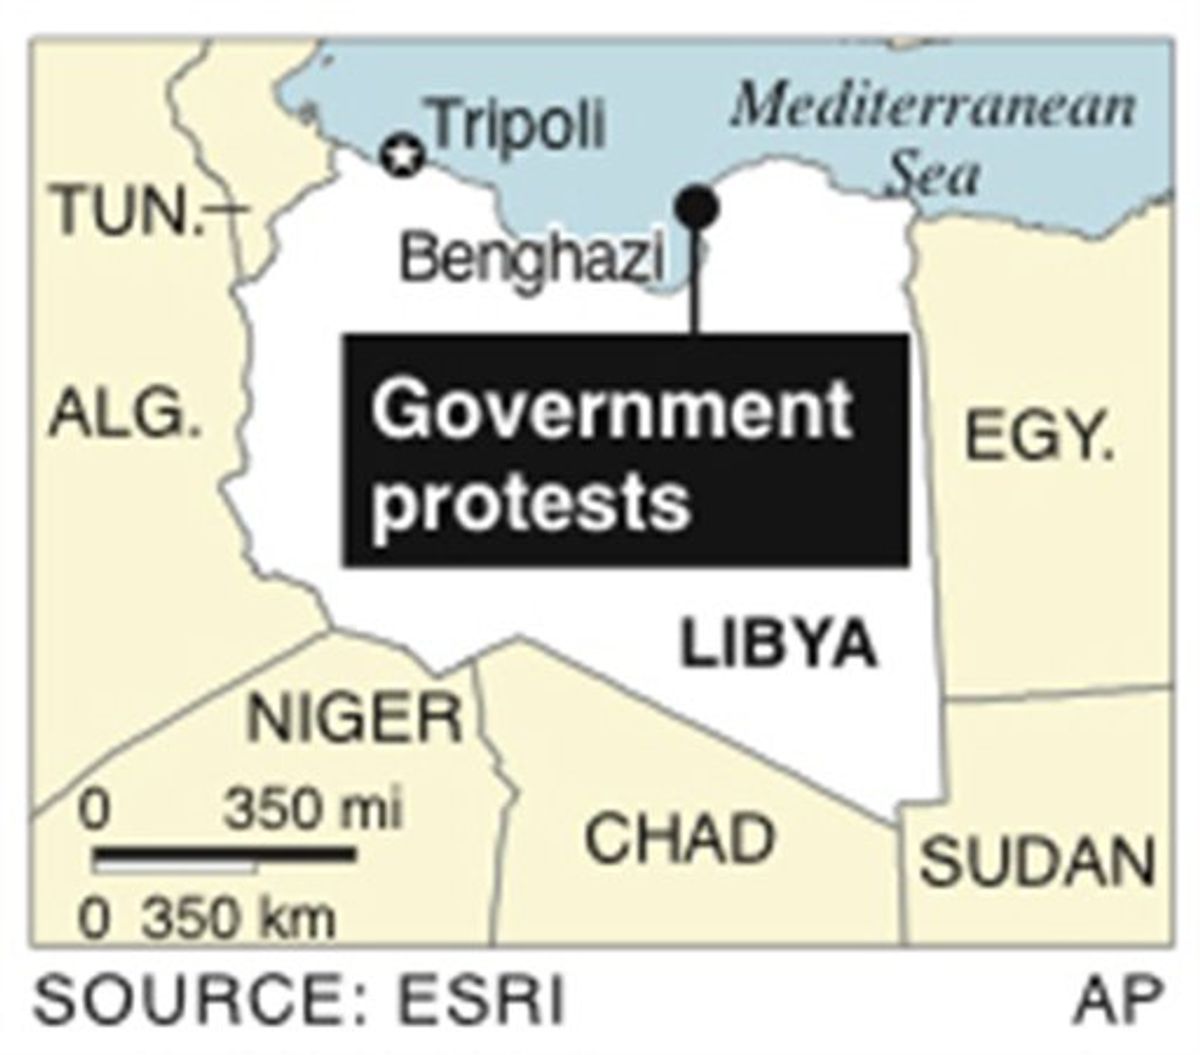 Map locates Benghazi, Libya, where there are protests to ouster the government (AP)